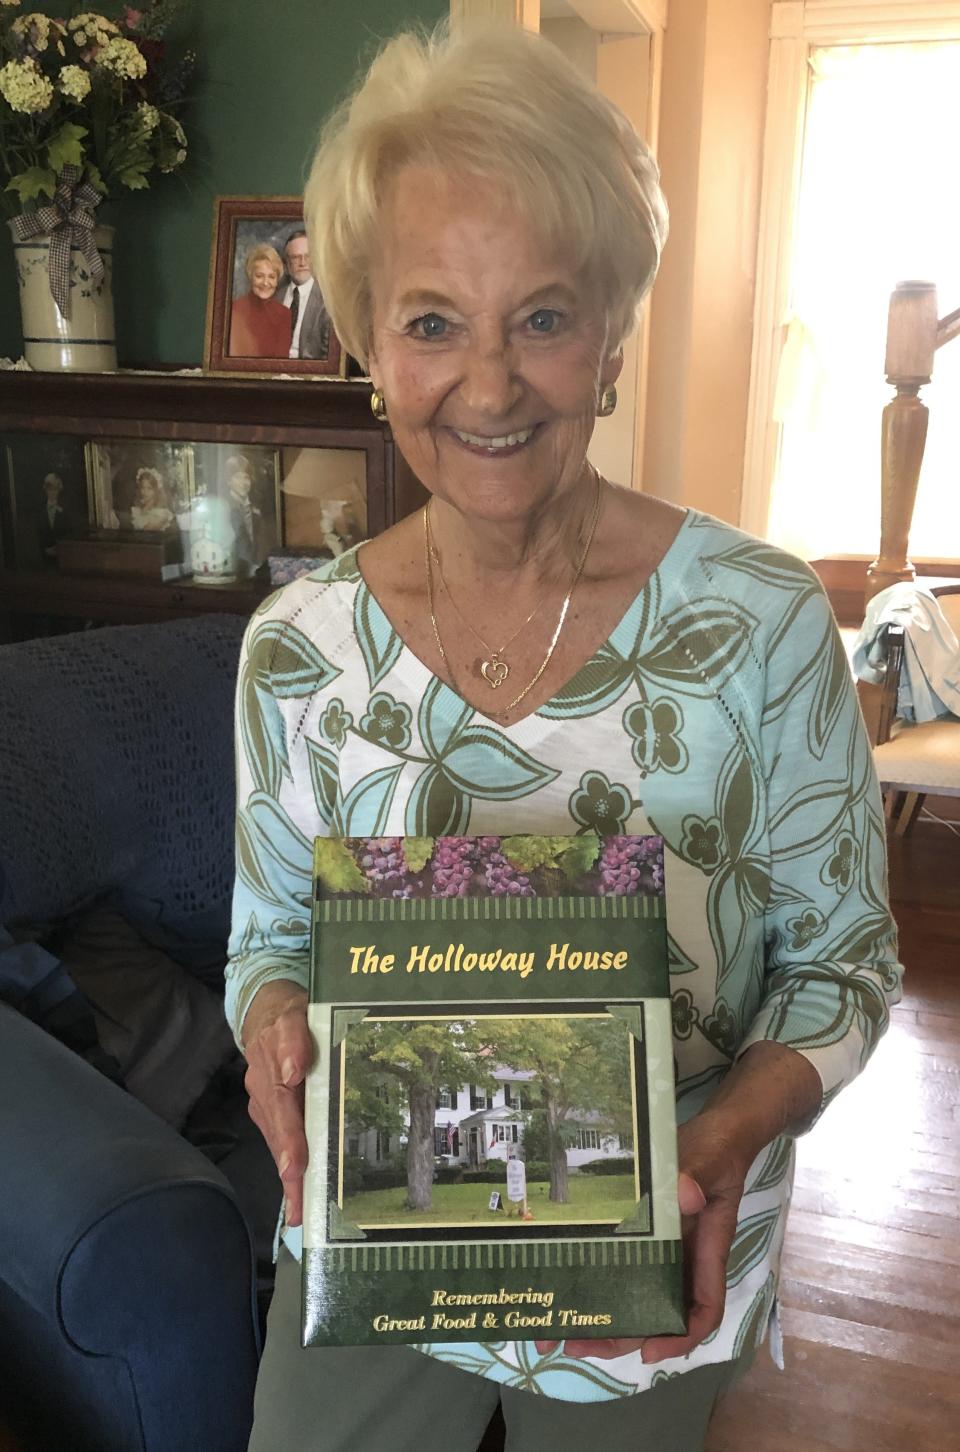 Dawn Wayne has just released a cookbook, "The Holloway House: Remembering Great Food & Good Times." She and husband Steve owned the iconic restaurant in Bloomfield for years before closing.